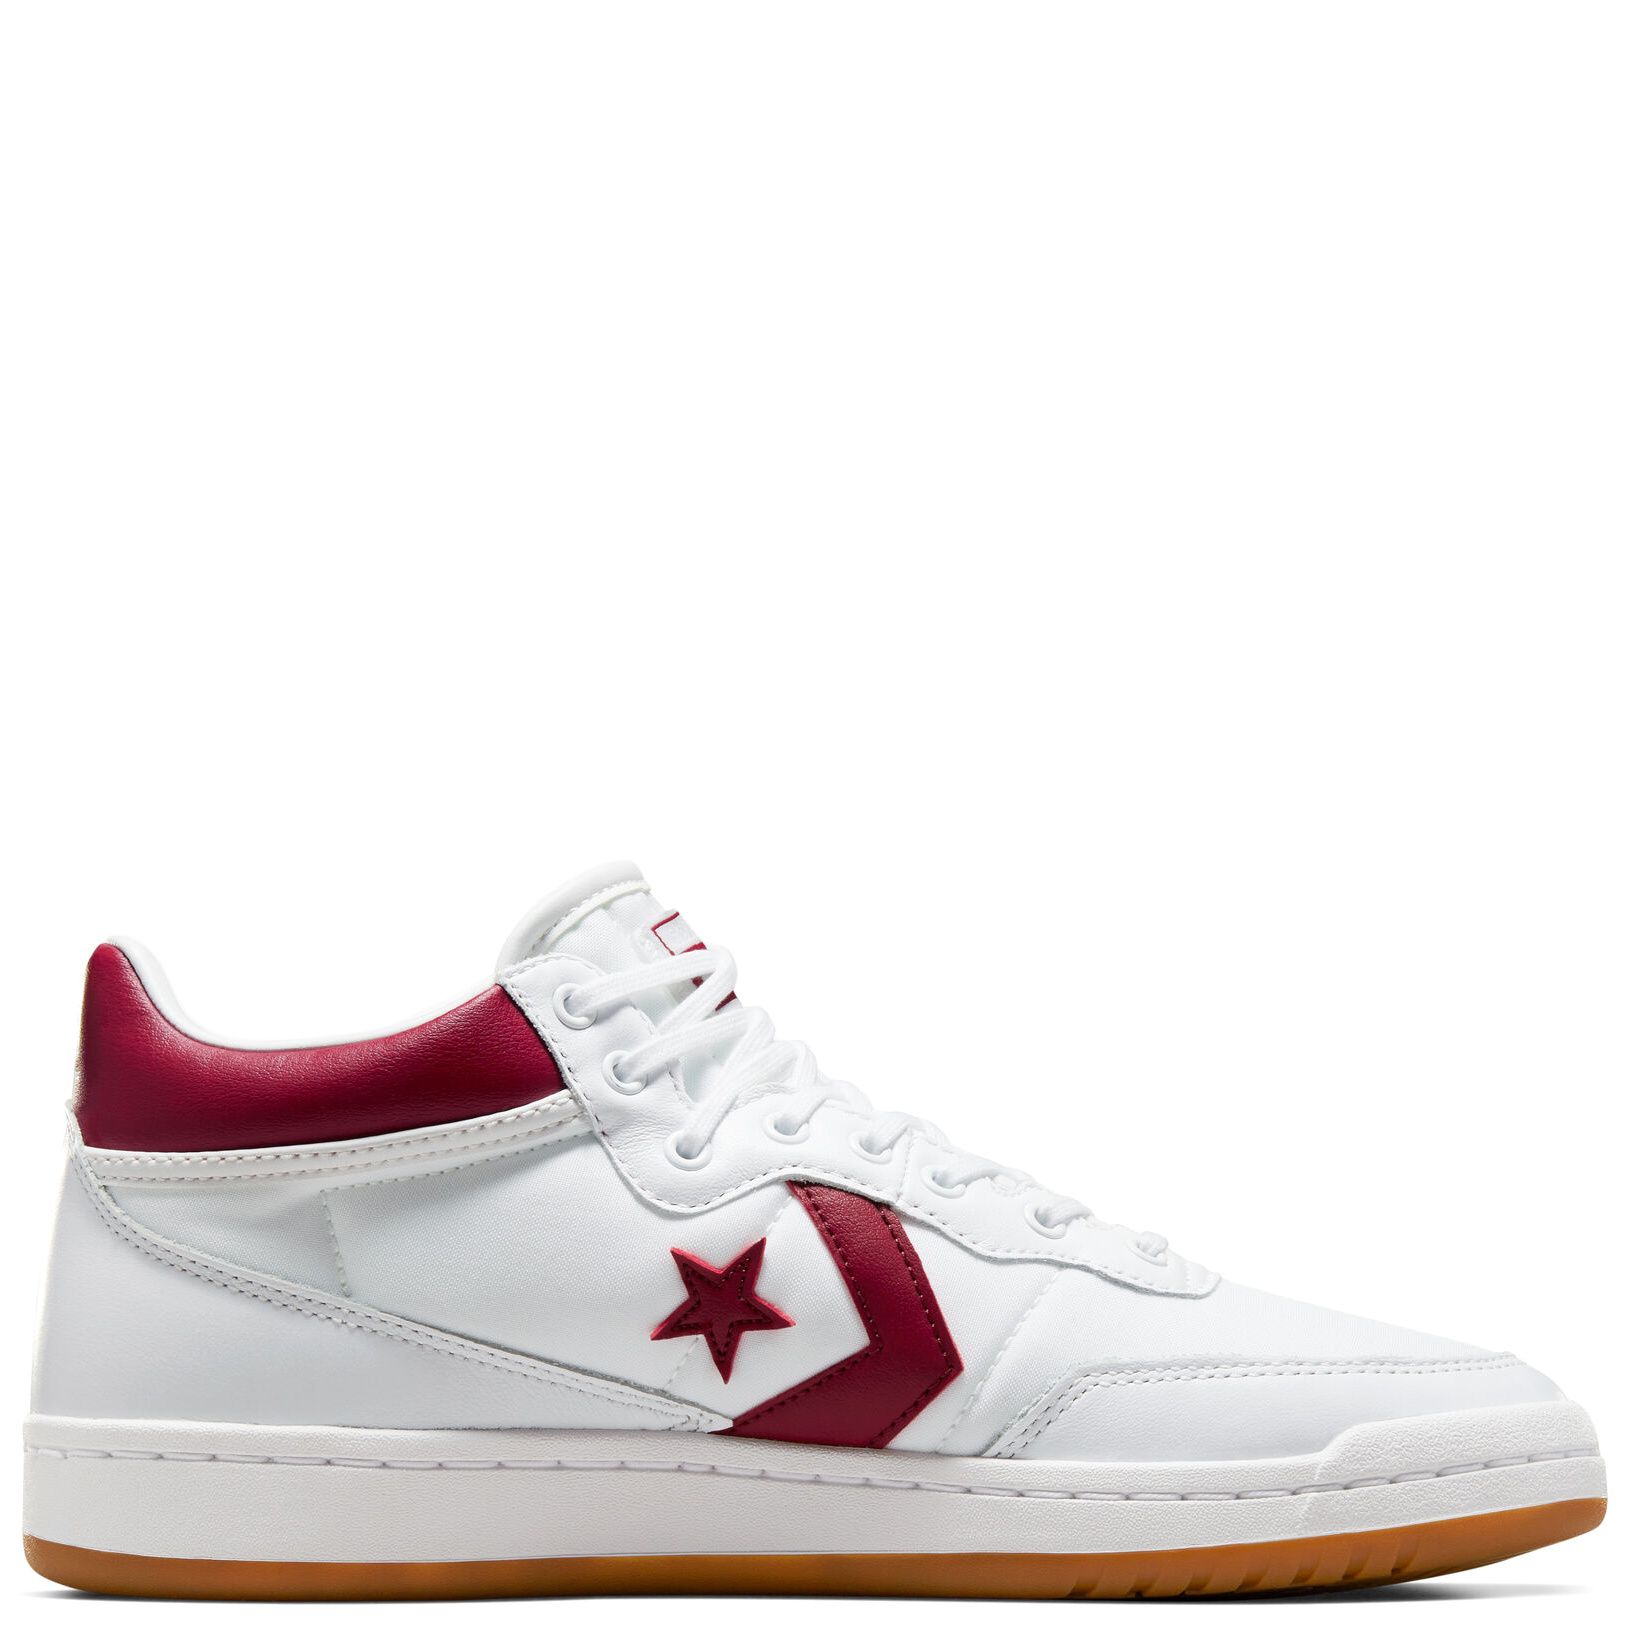 Okklusion Learner Lår Converse CONS Fastbreak Pro Mid Leather - White/Team Red/White - MODA3